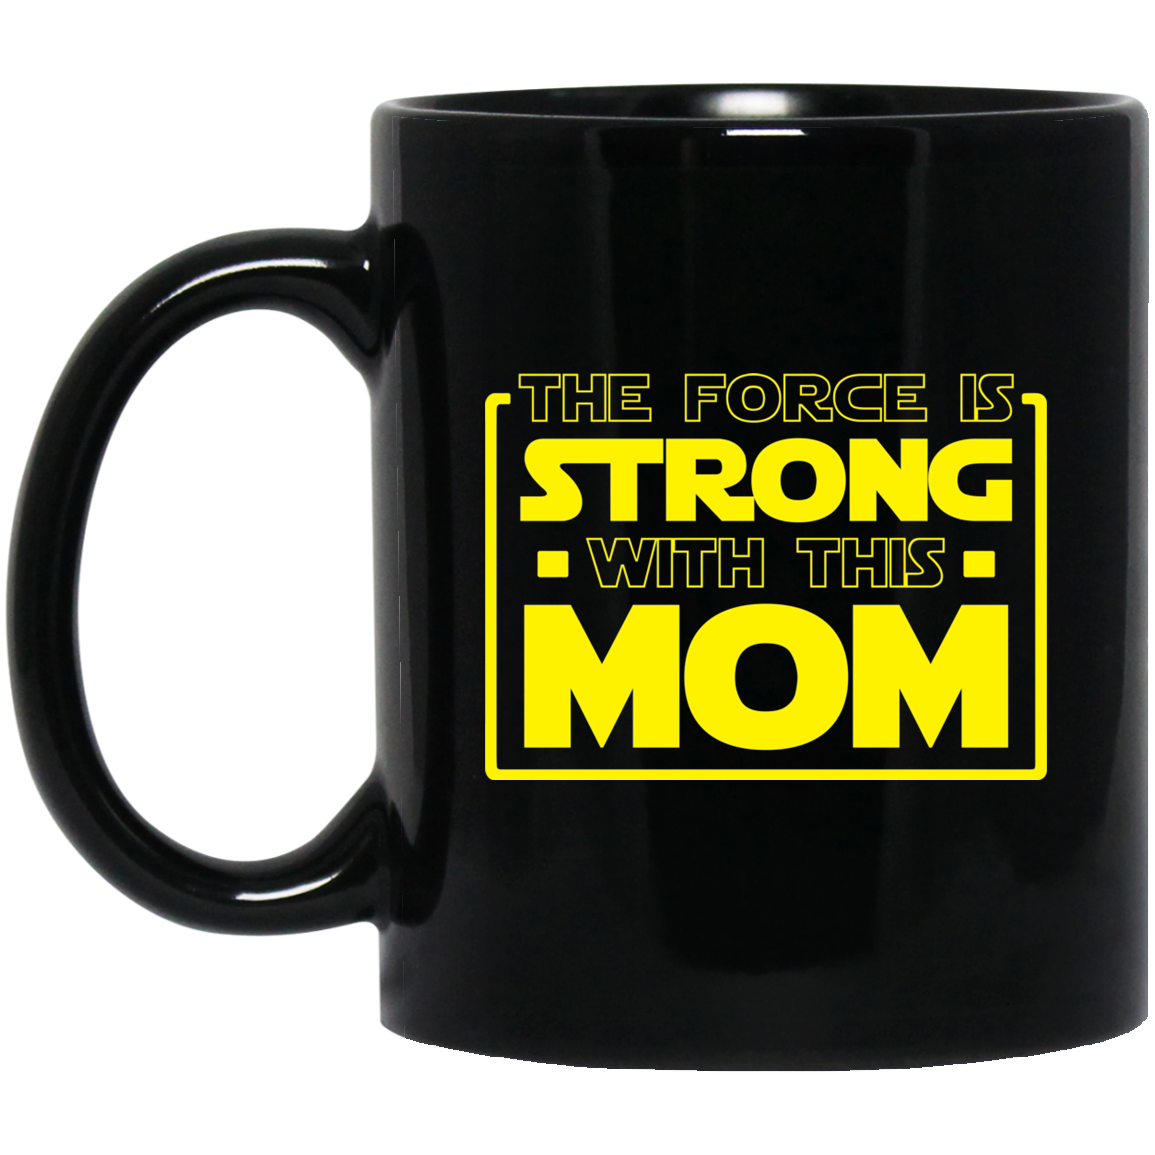 The Force Is Strong With This Mom 11 oz. Black Mug